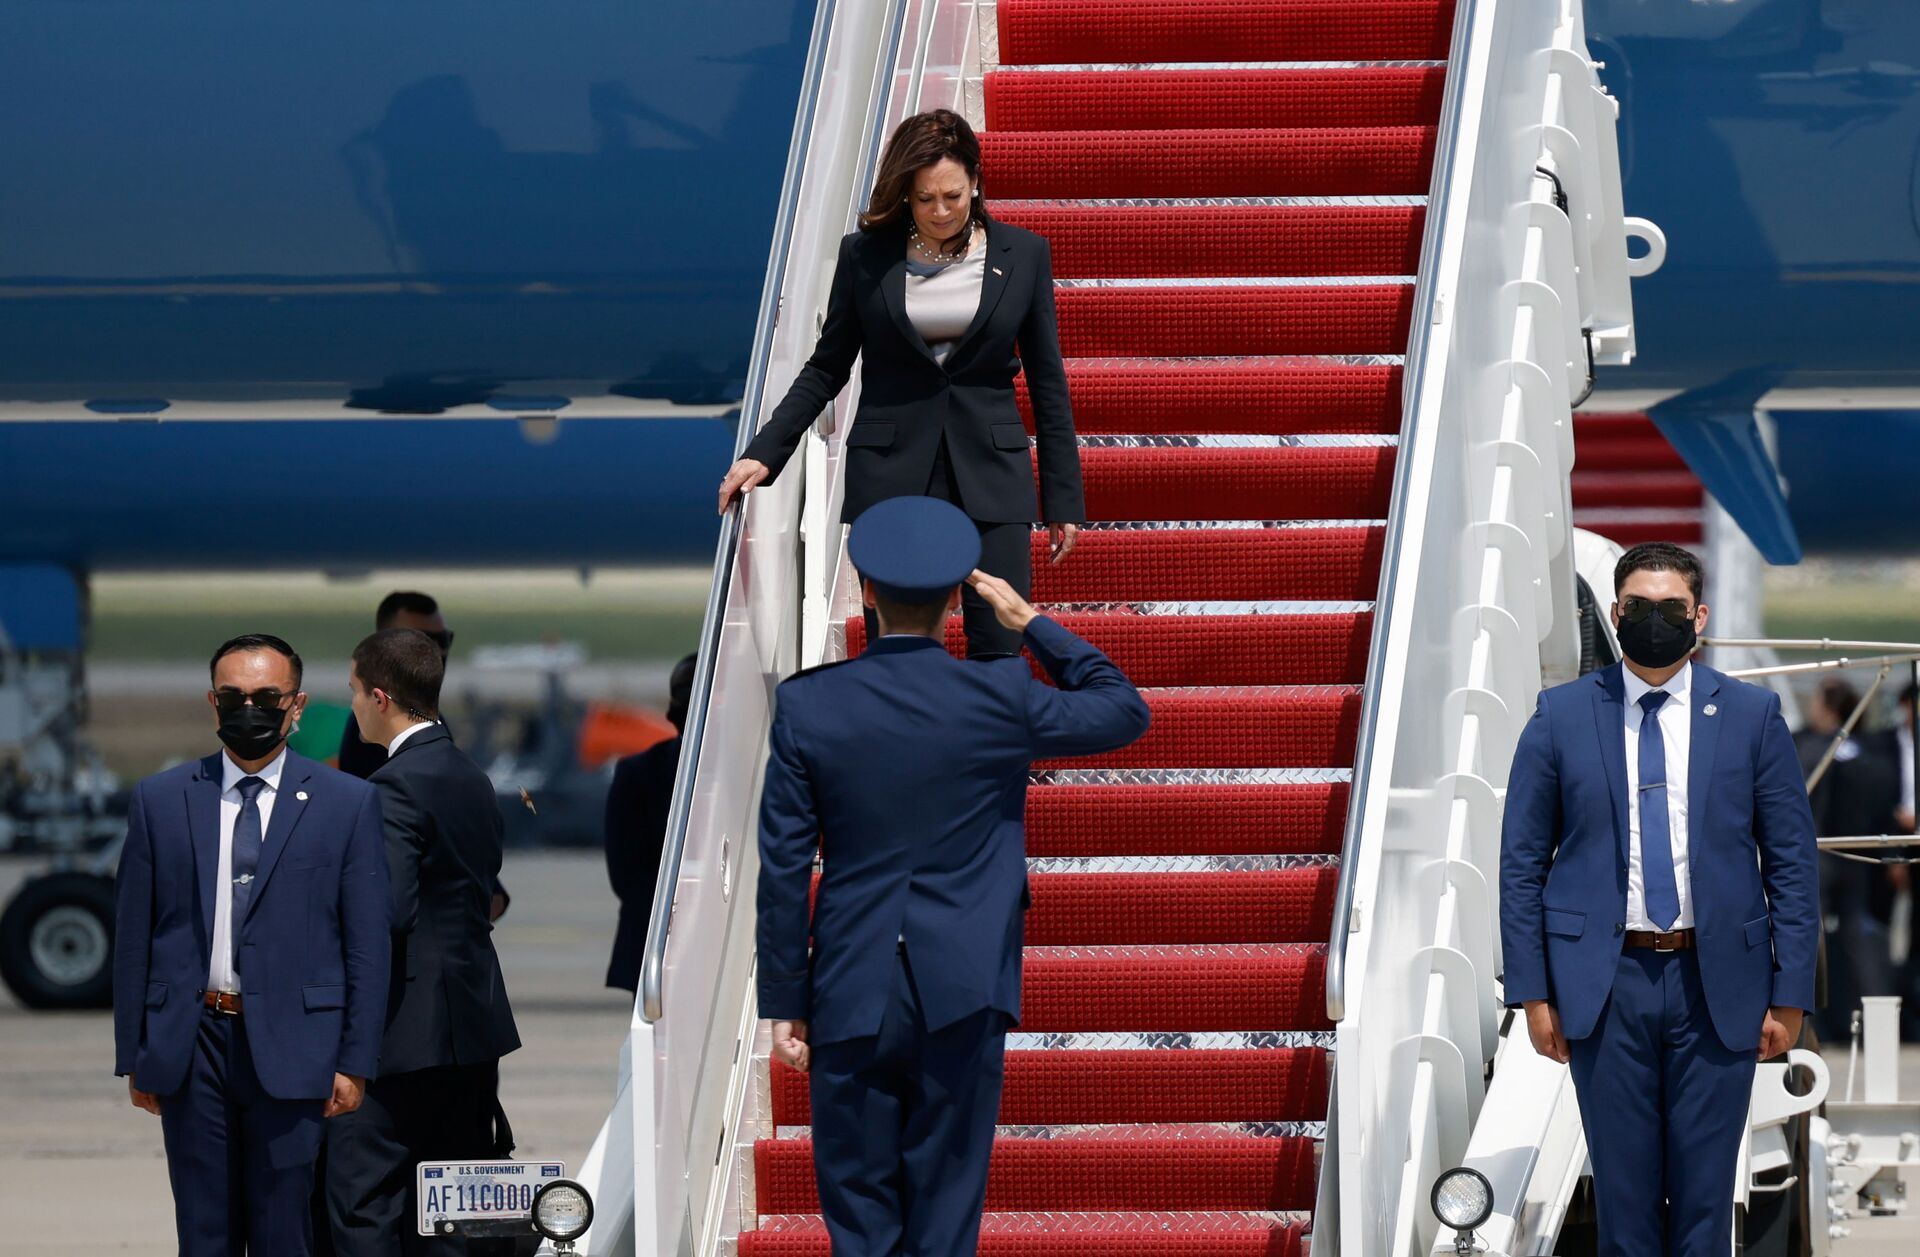 U.S. Vice President Kamala Harris gets off the Air Force Two, after technical difficulties that made her change planes for her first international trip as Vice President to Guatemala and Mexico, at Joint Base Andrews, Maryland, U.S., June 6, 2021 - Sputnik International, 1920, 07.09.2021